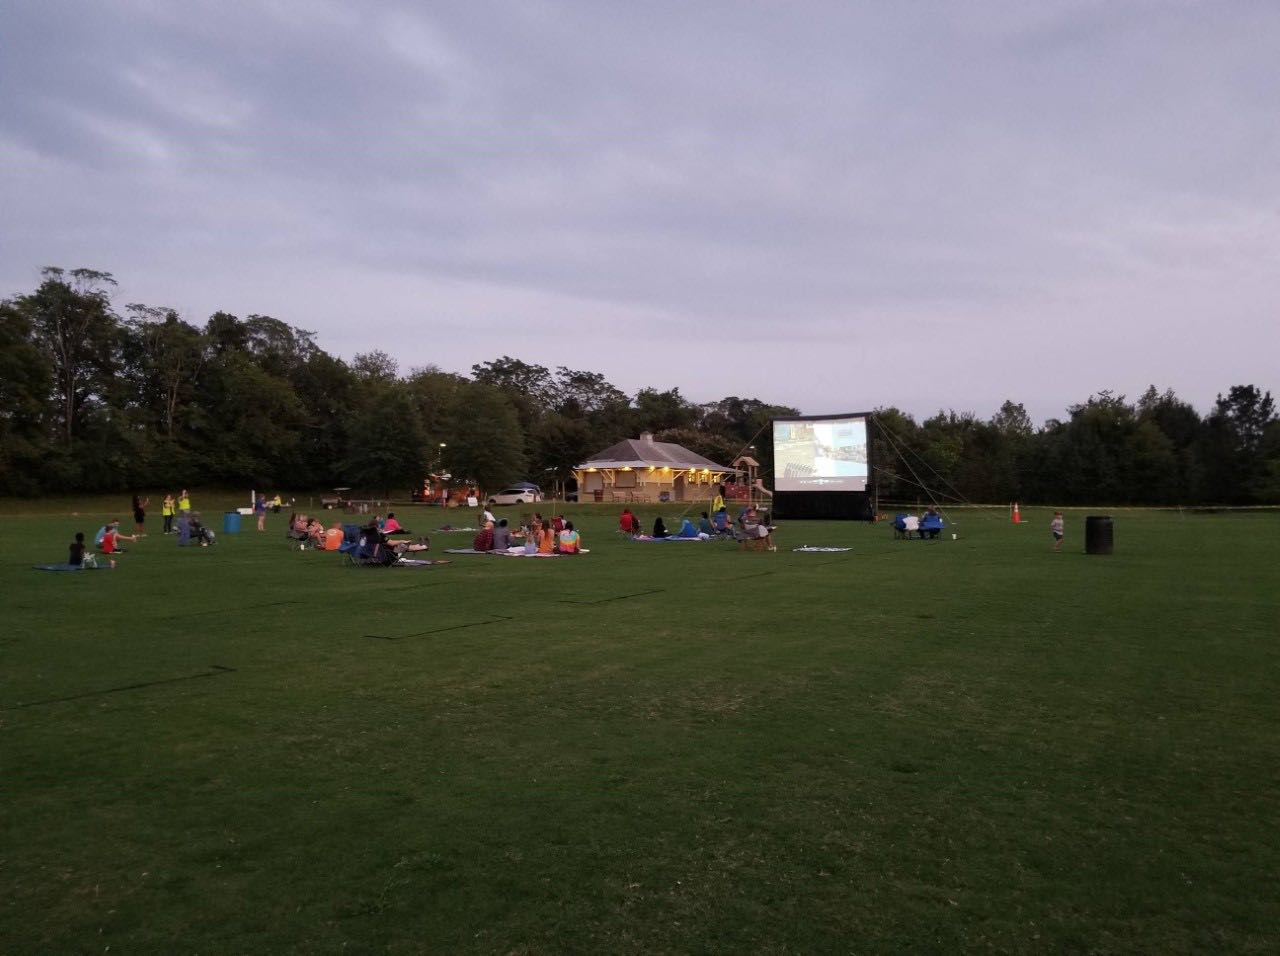 T-Mobile helps City bring outdoor movies to community